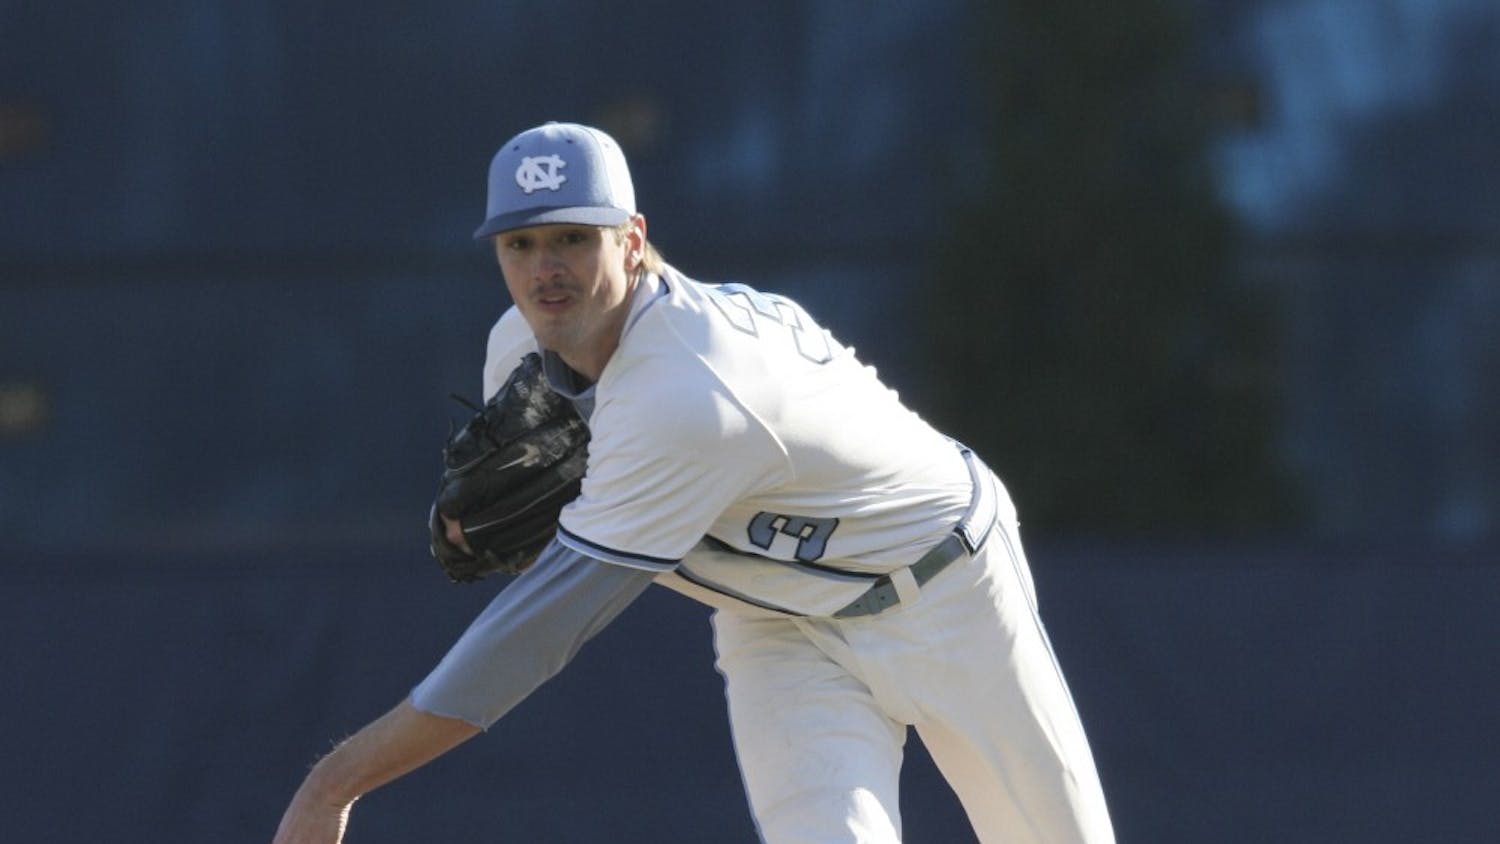 Andrew Miller pitches against Seton Hall on February 19, 2006. Miller played for the UNC baseball team from 2004 to 2006.